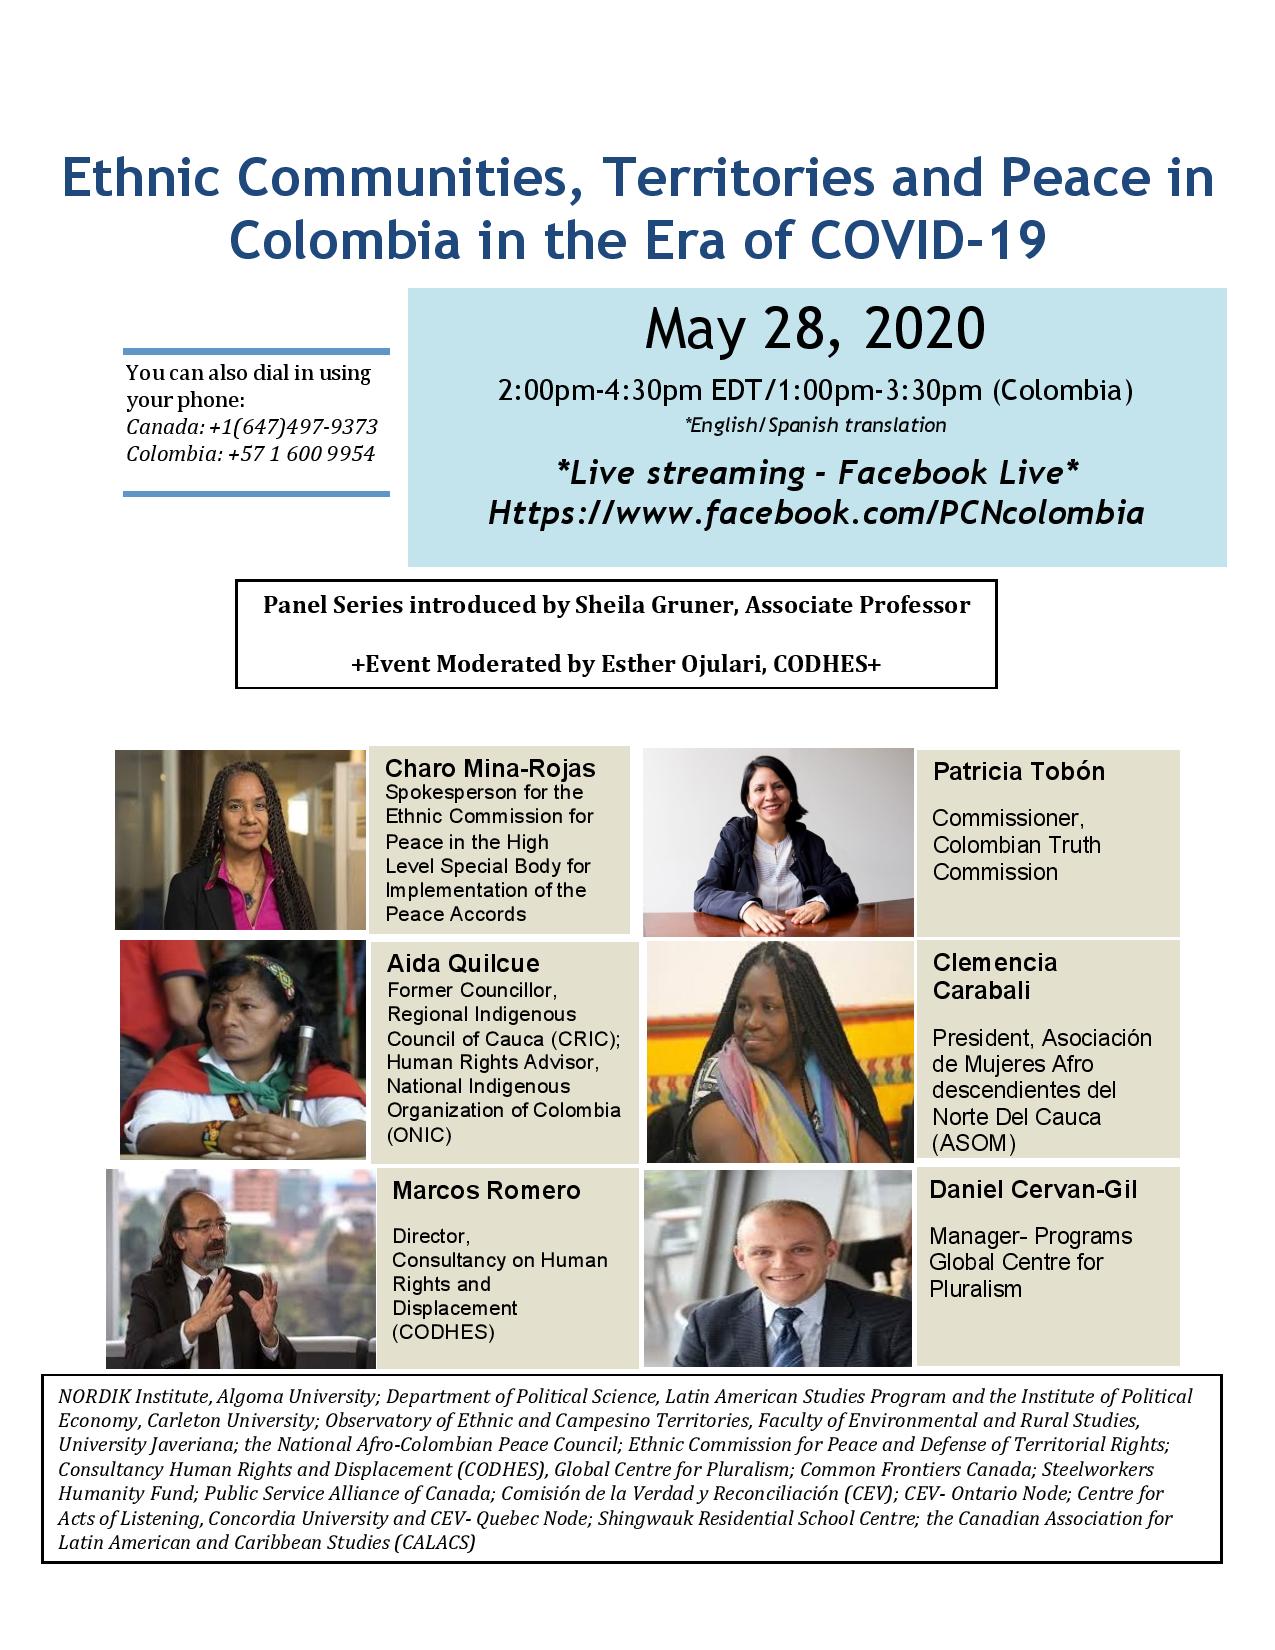 Ethnic Communities, Territories and Peace in Colombia in the Era of COVID-19